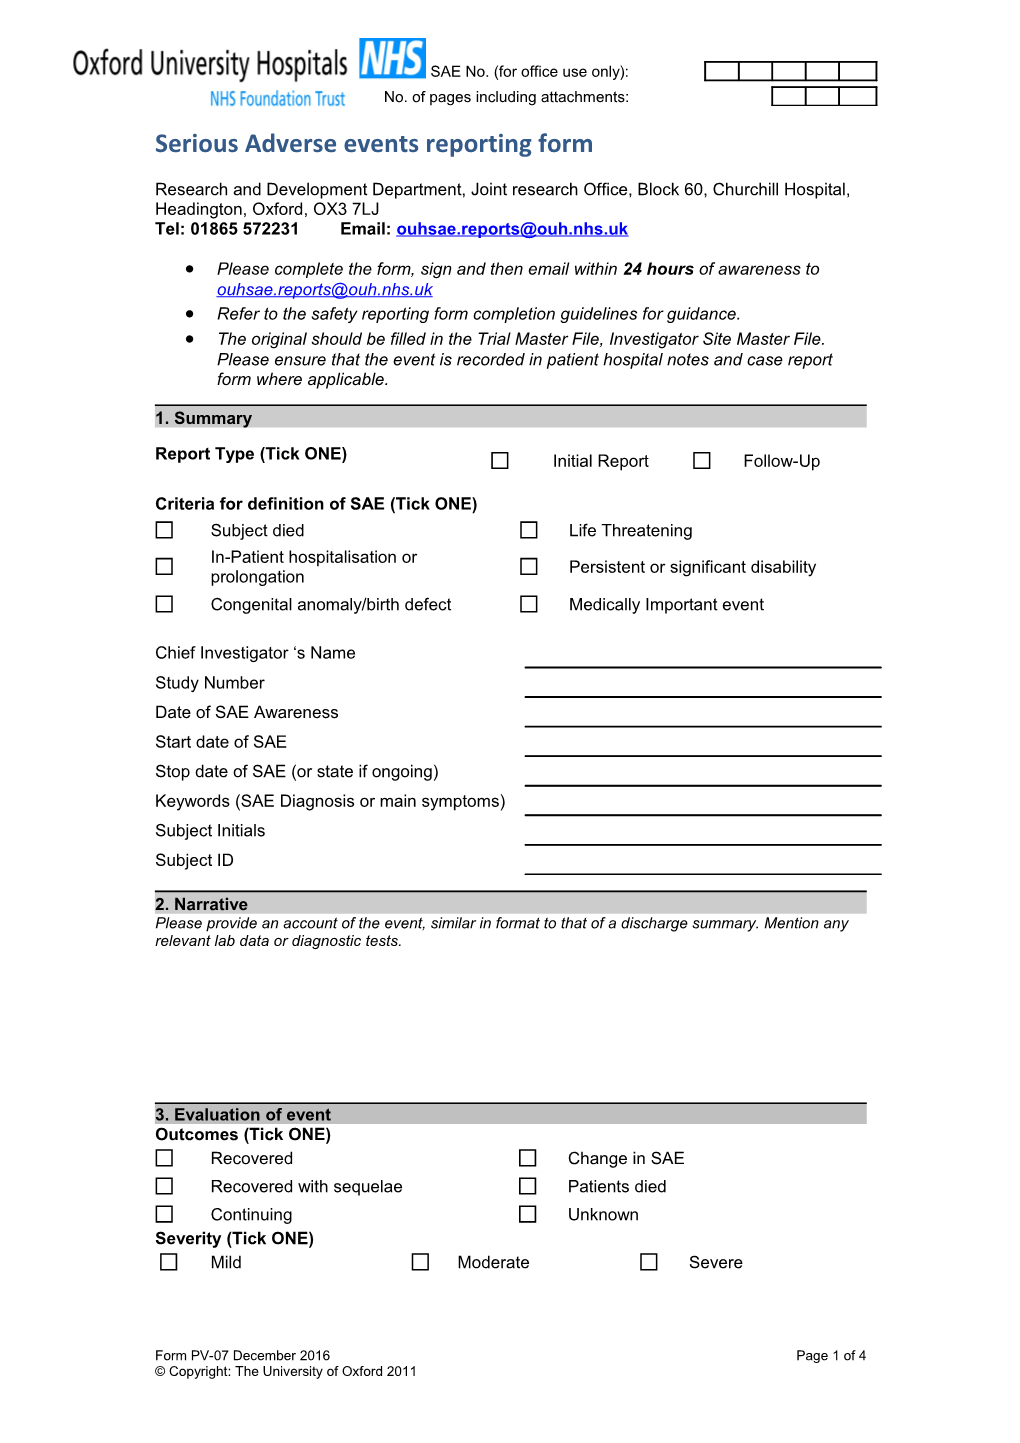 Serious Adverse Events Reporting Form